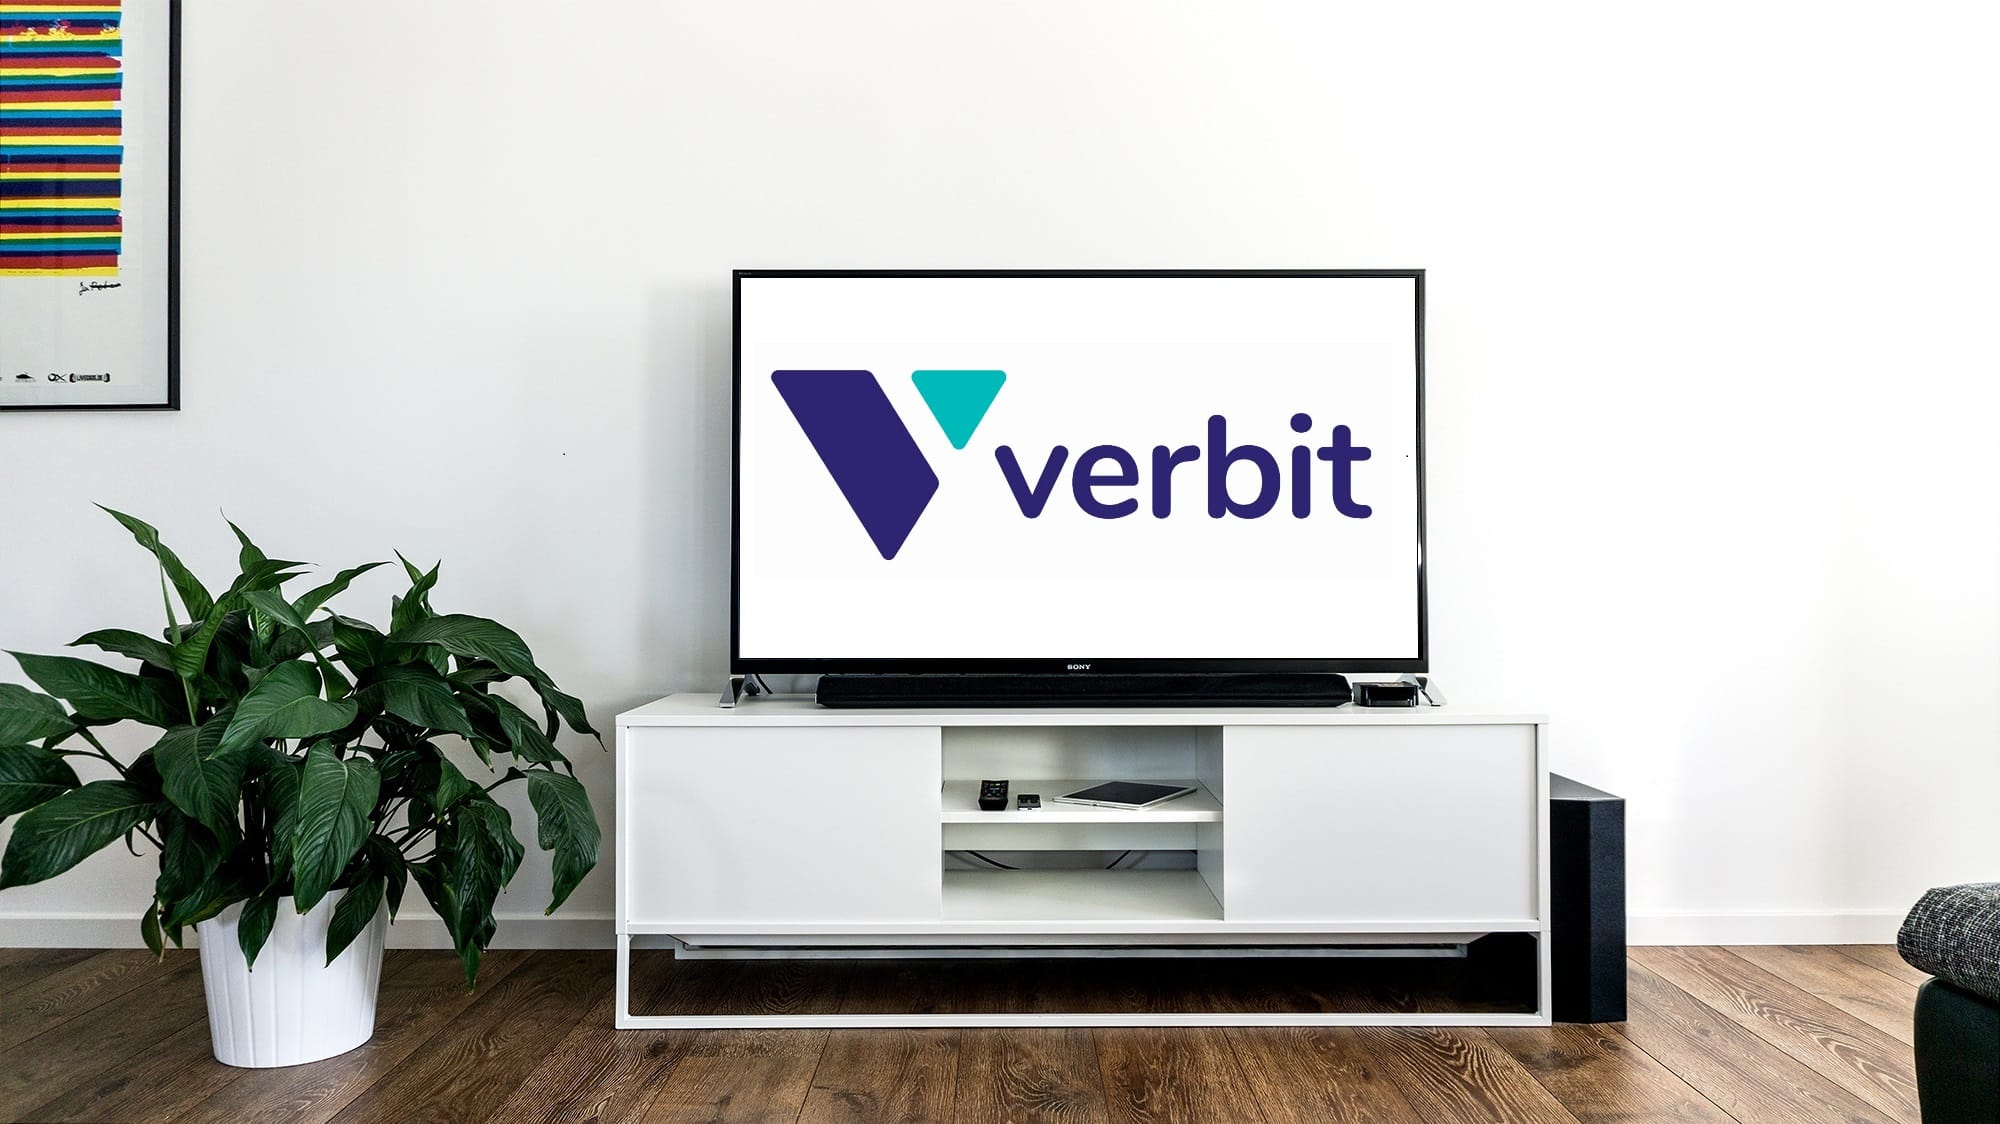 A television screed with the Verbit logo displayed in blue letters